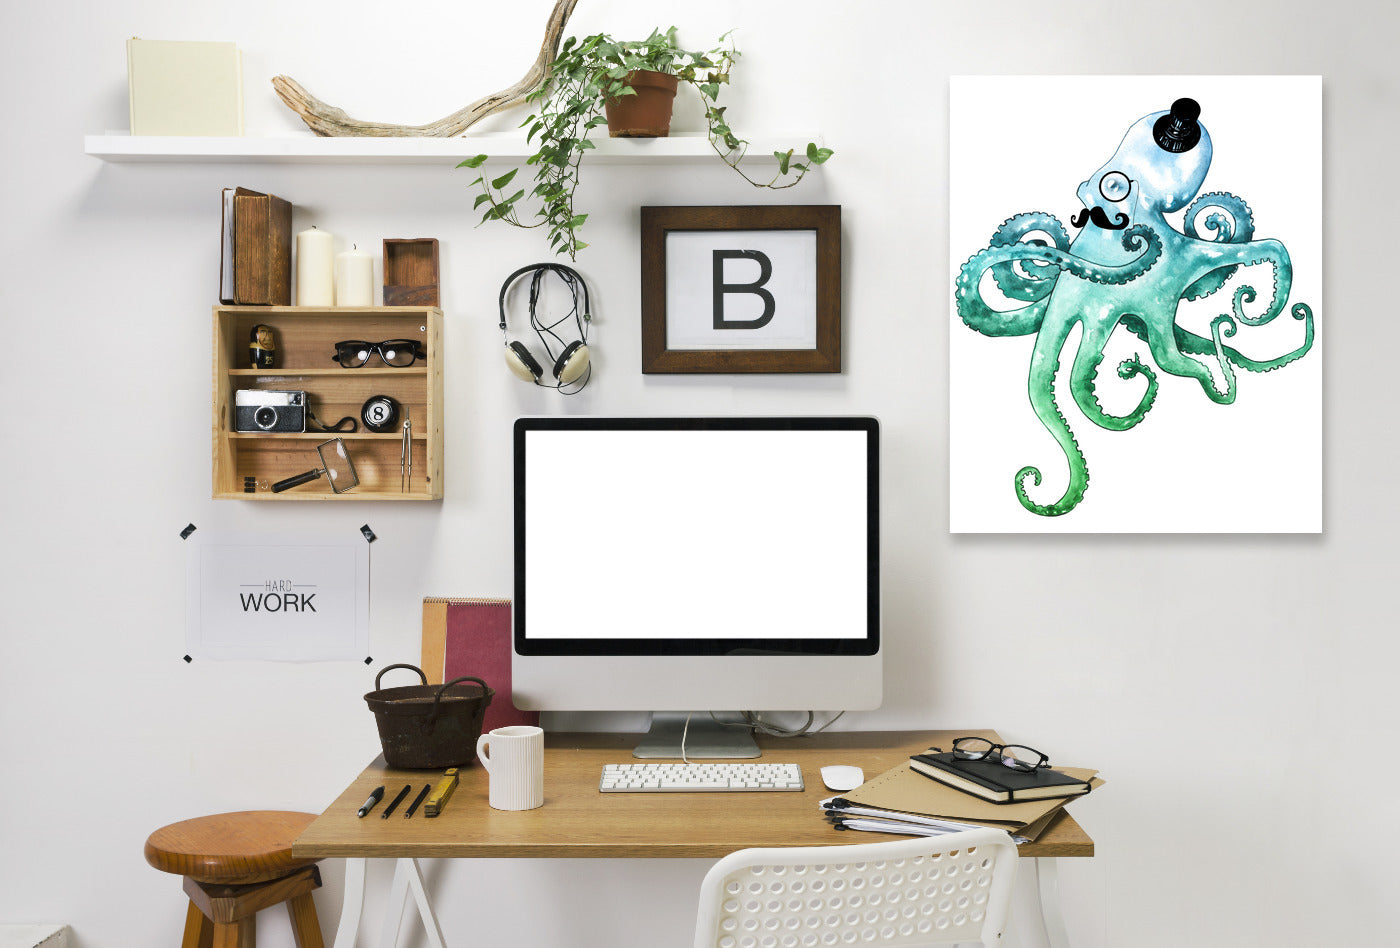 Dapper Octopus by Sam Nagel Wrapped Canvas - Wrapped Canvas - Americanflat